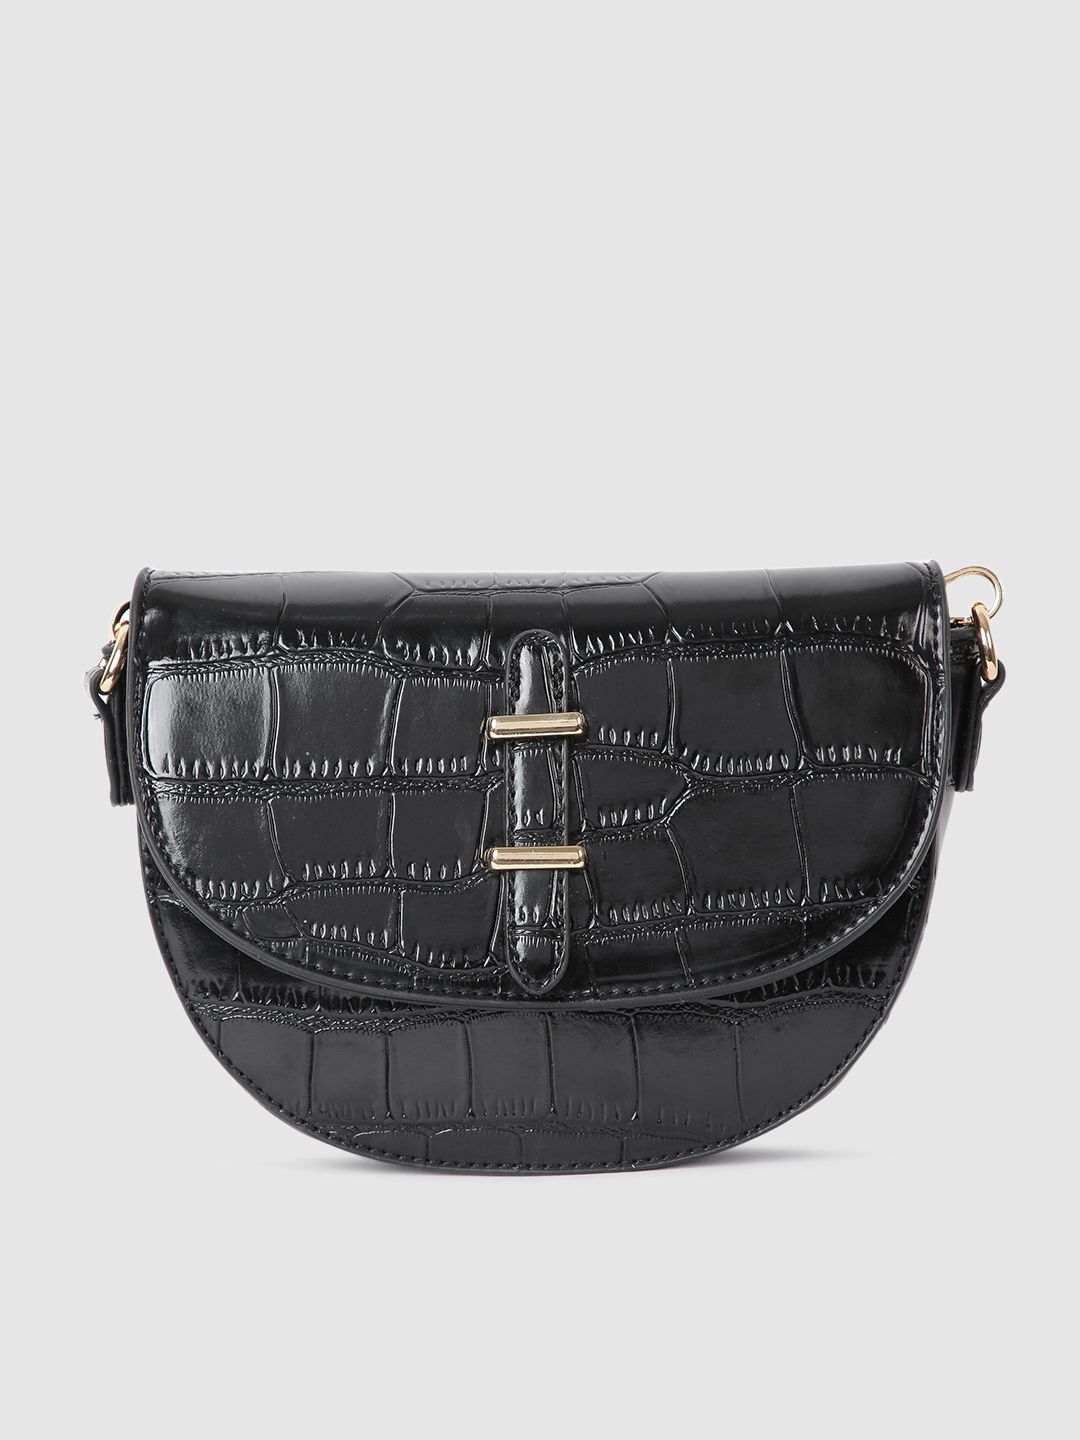 Mast & Harbour Black Animal Textured PU Regular Half Moon Sling Bag with Buckle Detail Price in India